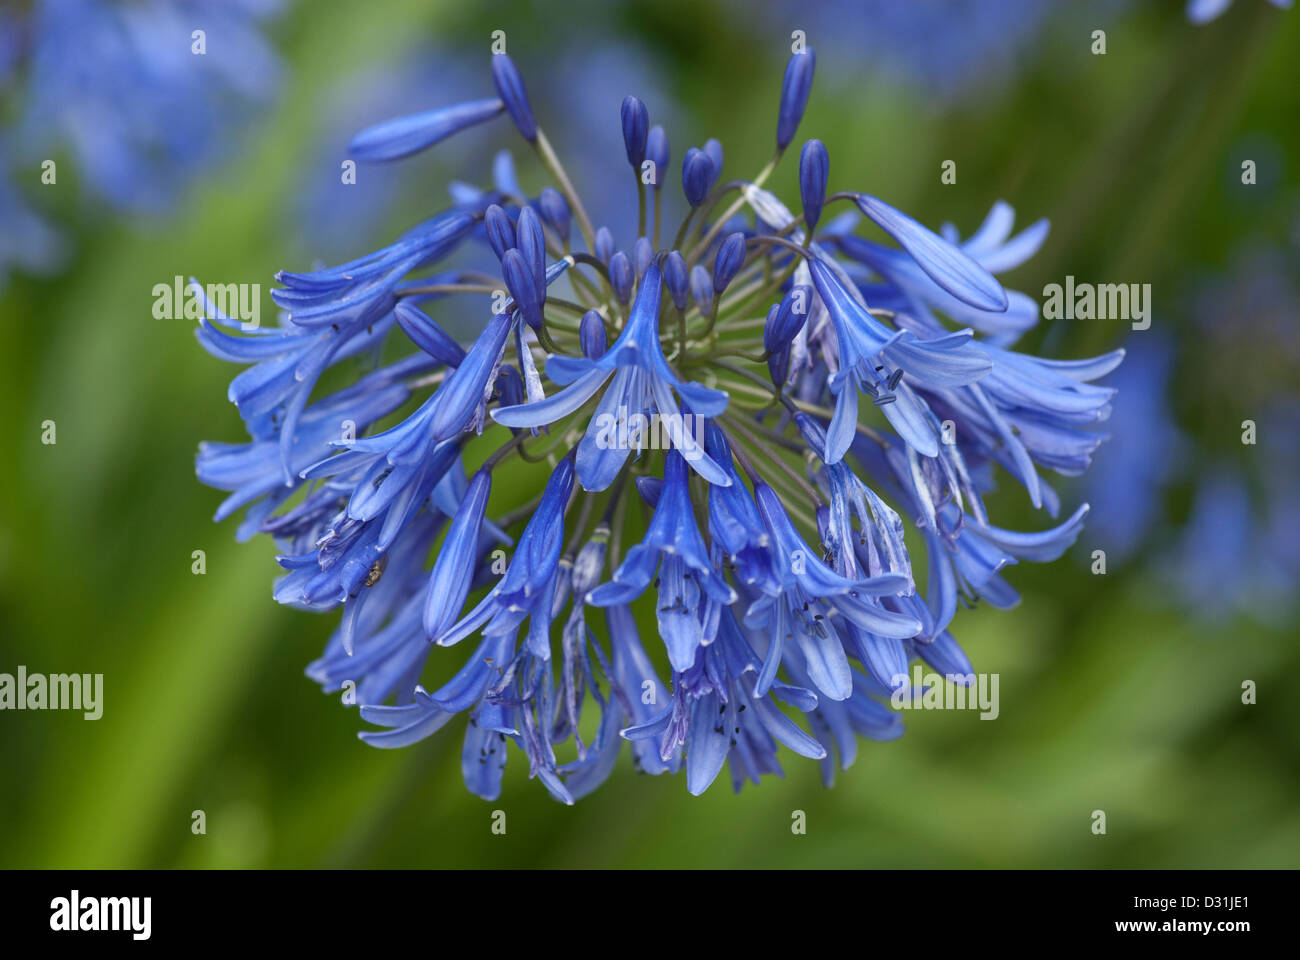 Agapanthus blue flowers in close up Stock Photo